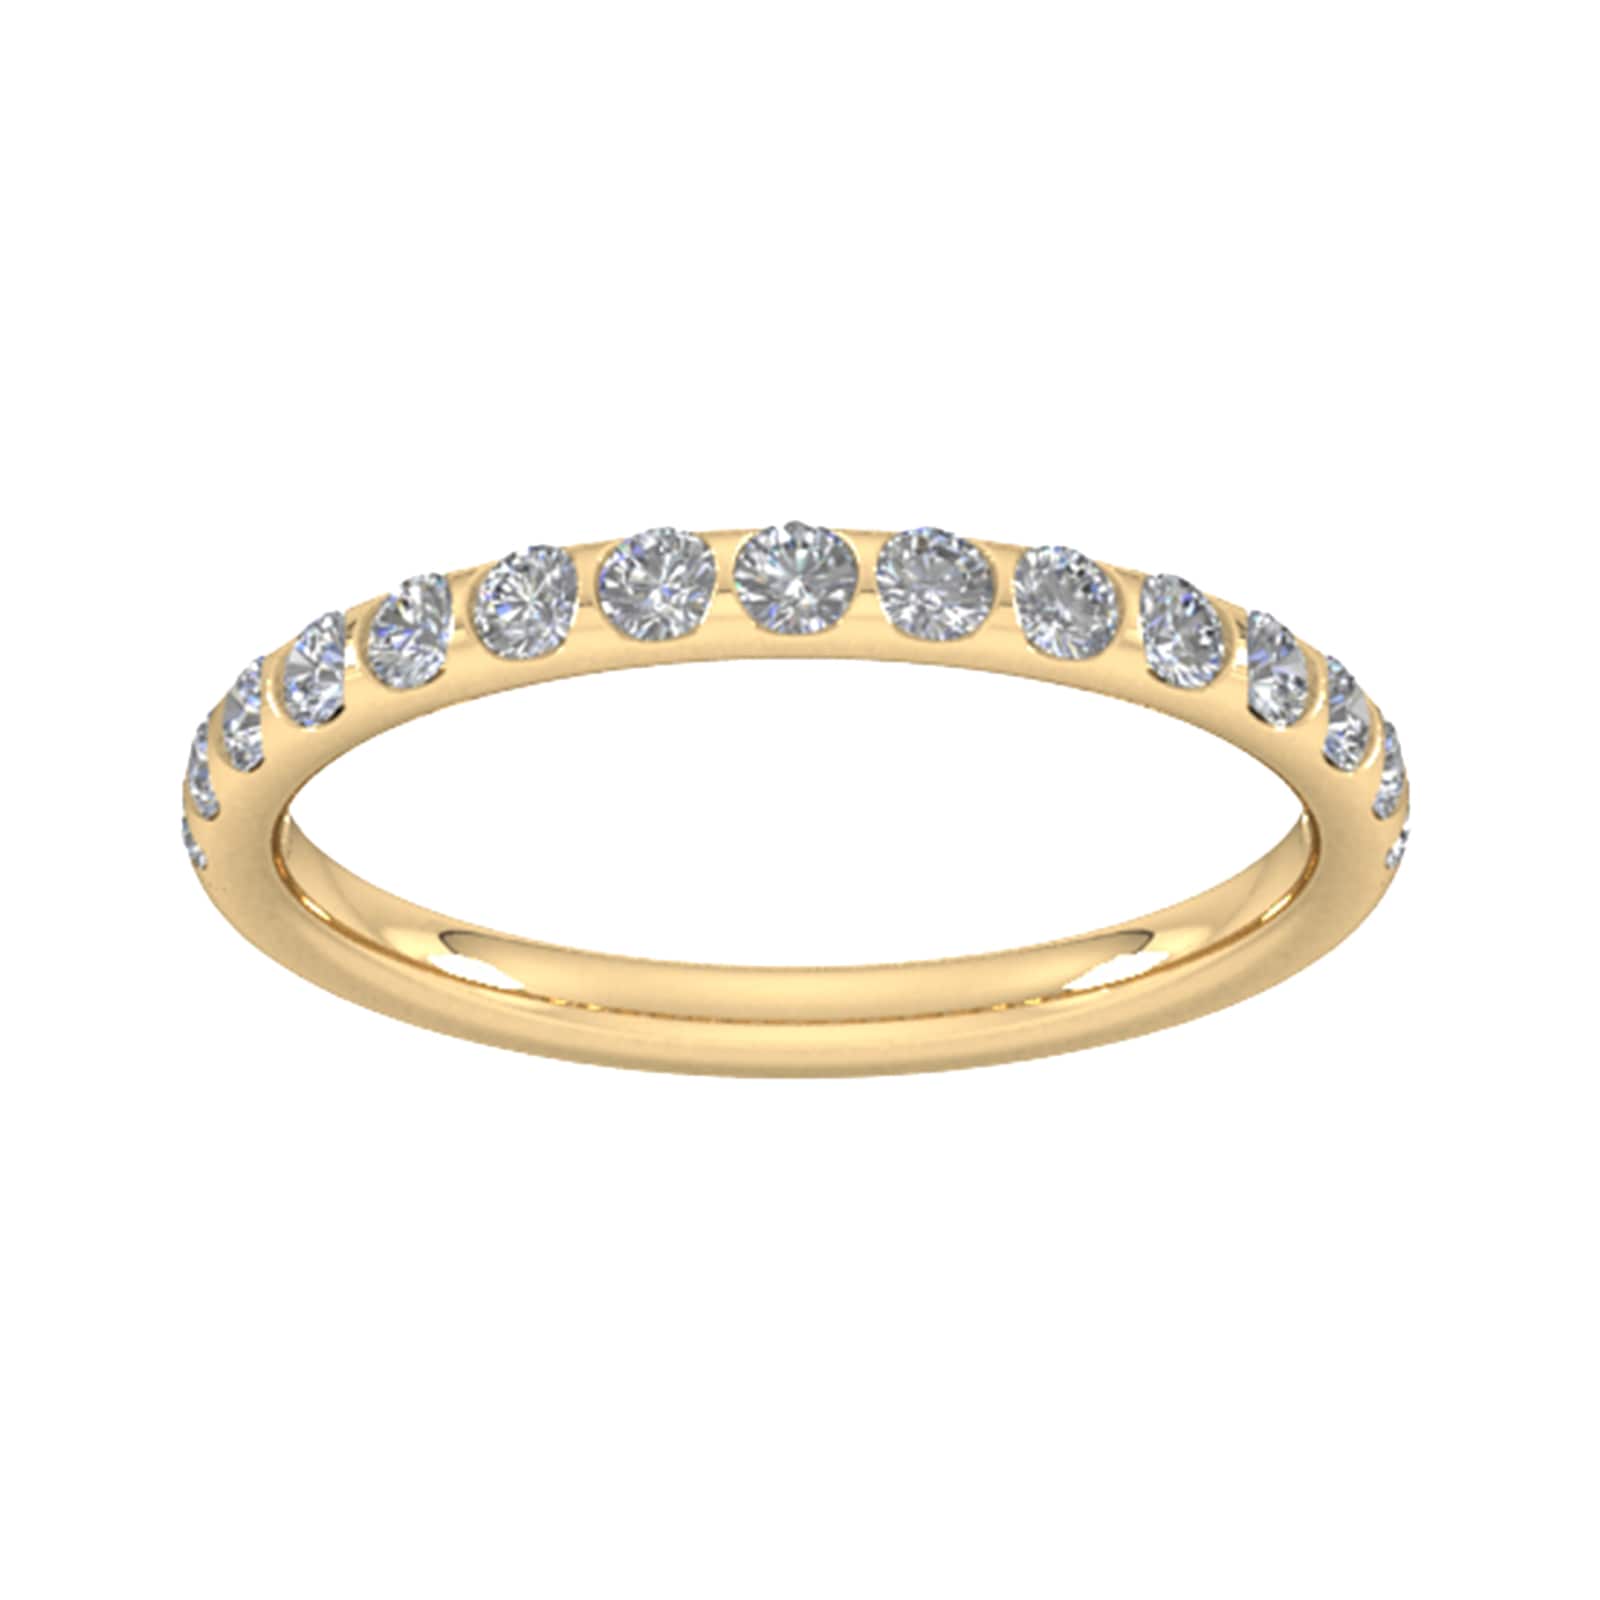 0.53 Carat Total Weight Curved Bar Brilliant Cut Diamond Set Wedding Ring In 9 Carat Yellow Gold - Ring Size W